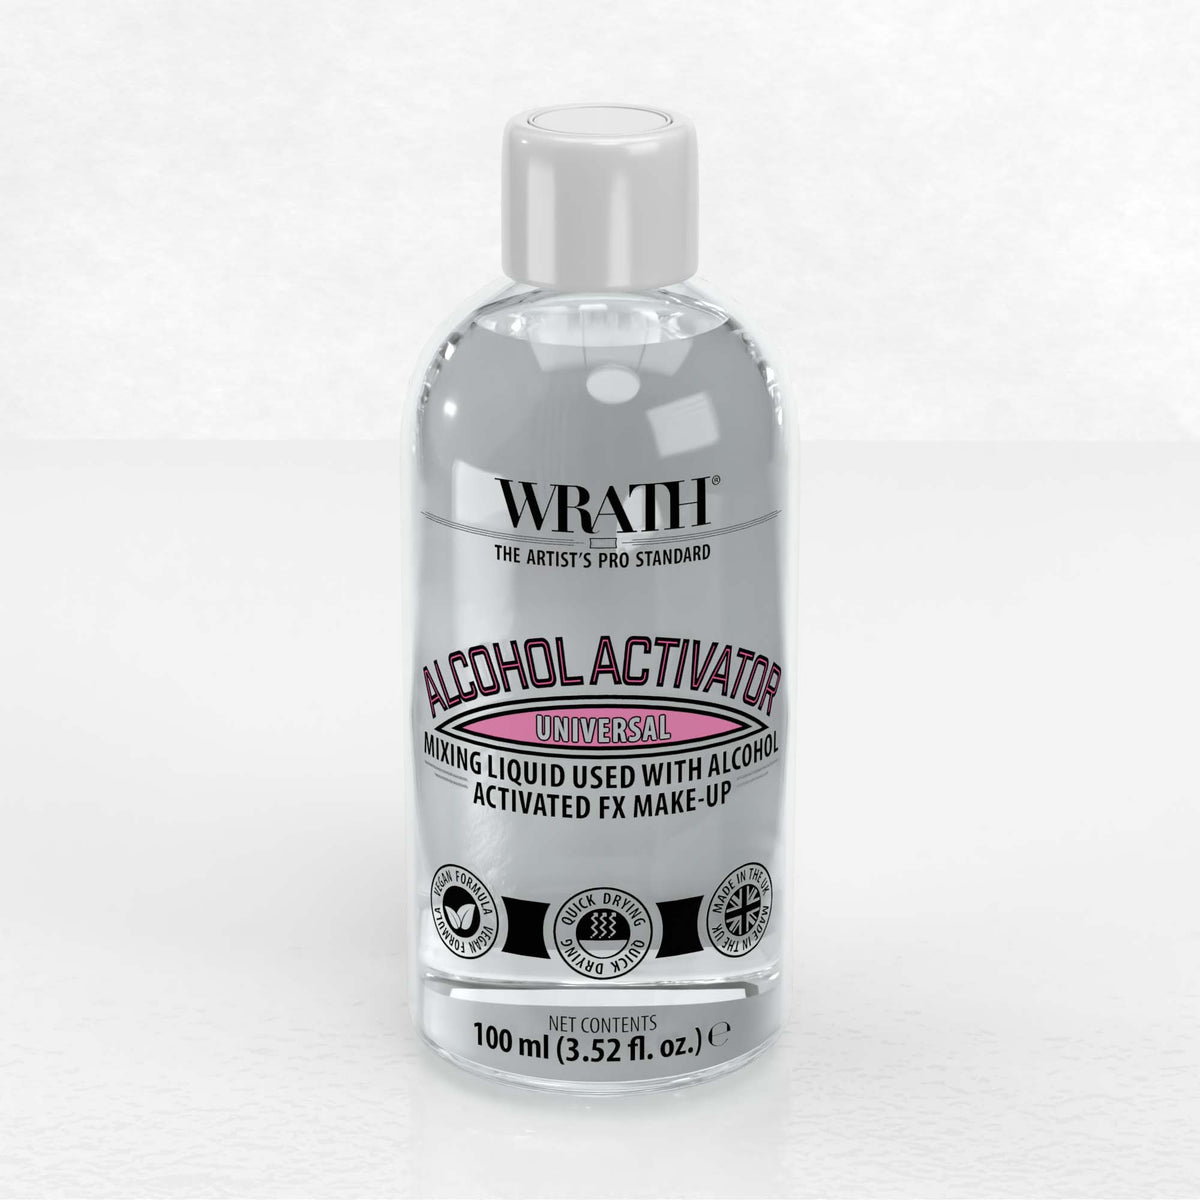 WRATH Alcohol Activator - Mixing Liquid for AA Make-up